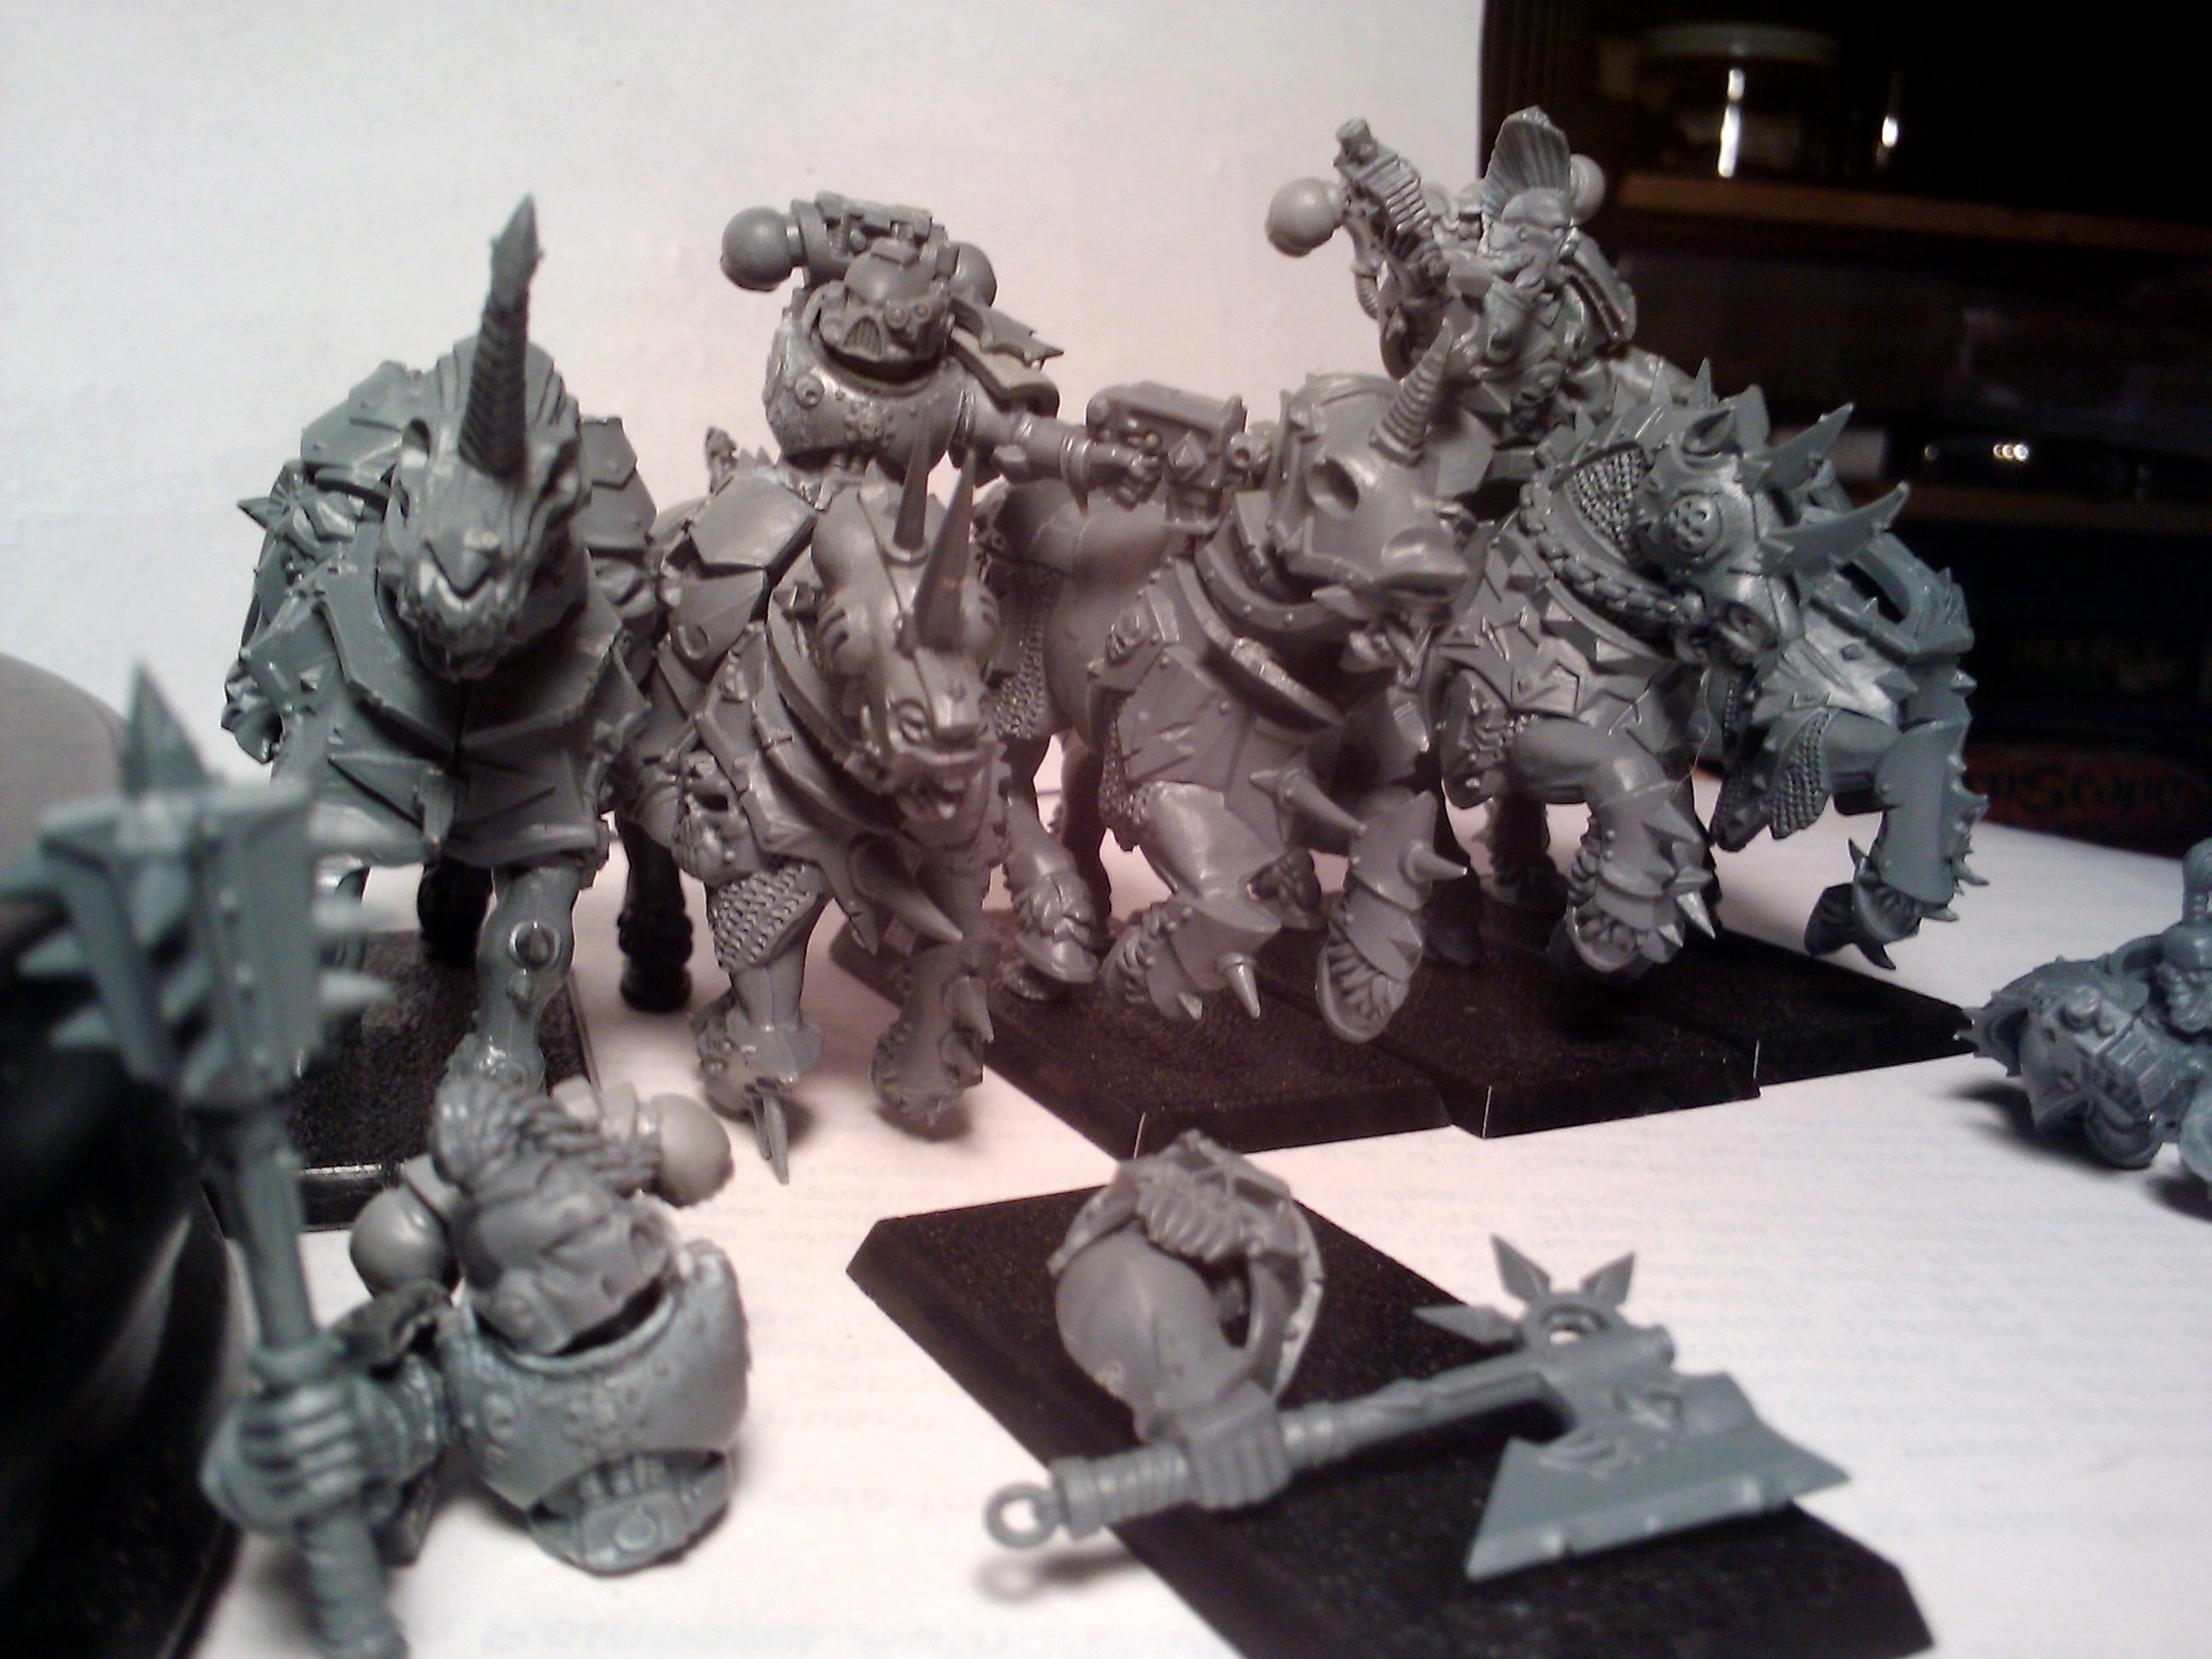 Cavalry, Chaos, Conversion, Hobby, Kill Team, Scenario, Space Marines, Space Wolves, Sw, Thunder Wolf